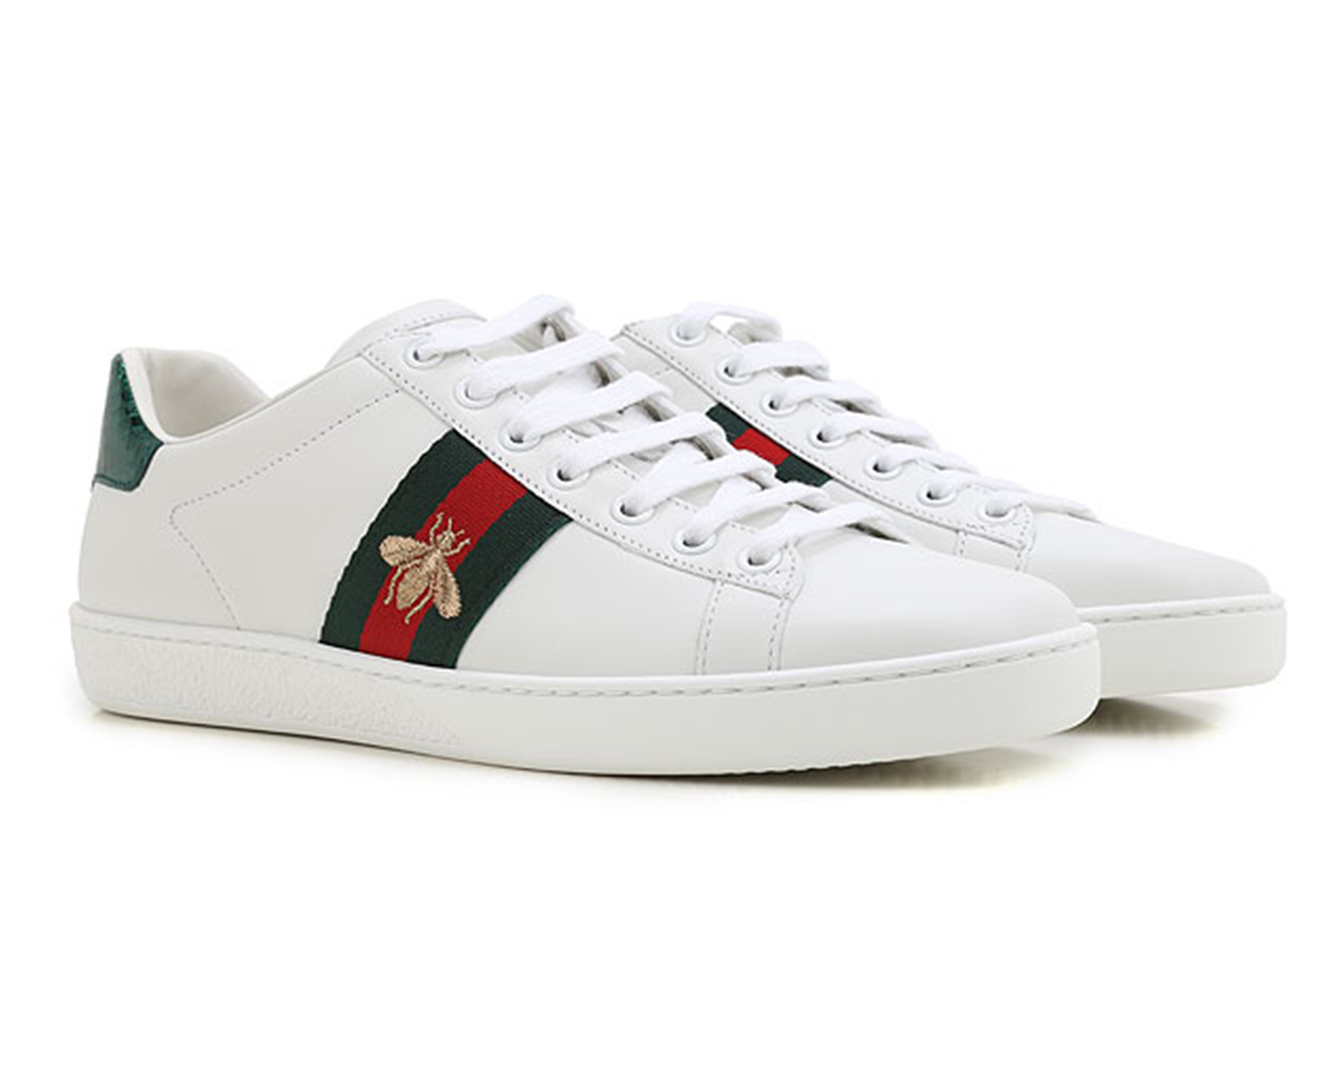 Gucci Women's Ace Embroidered Sneaker - White/Green/Red | Catch.co.nz